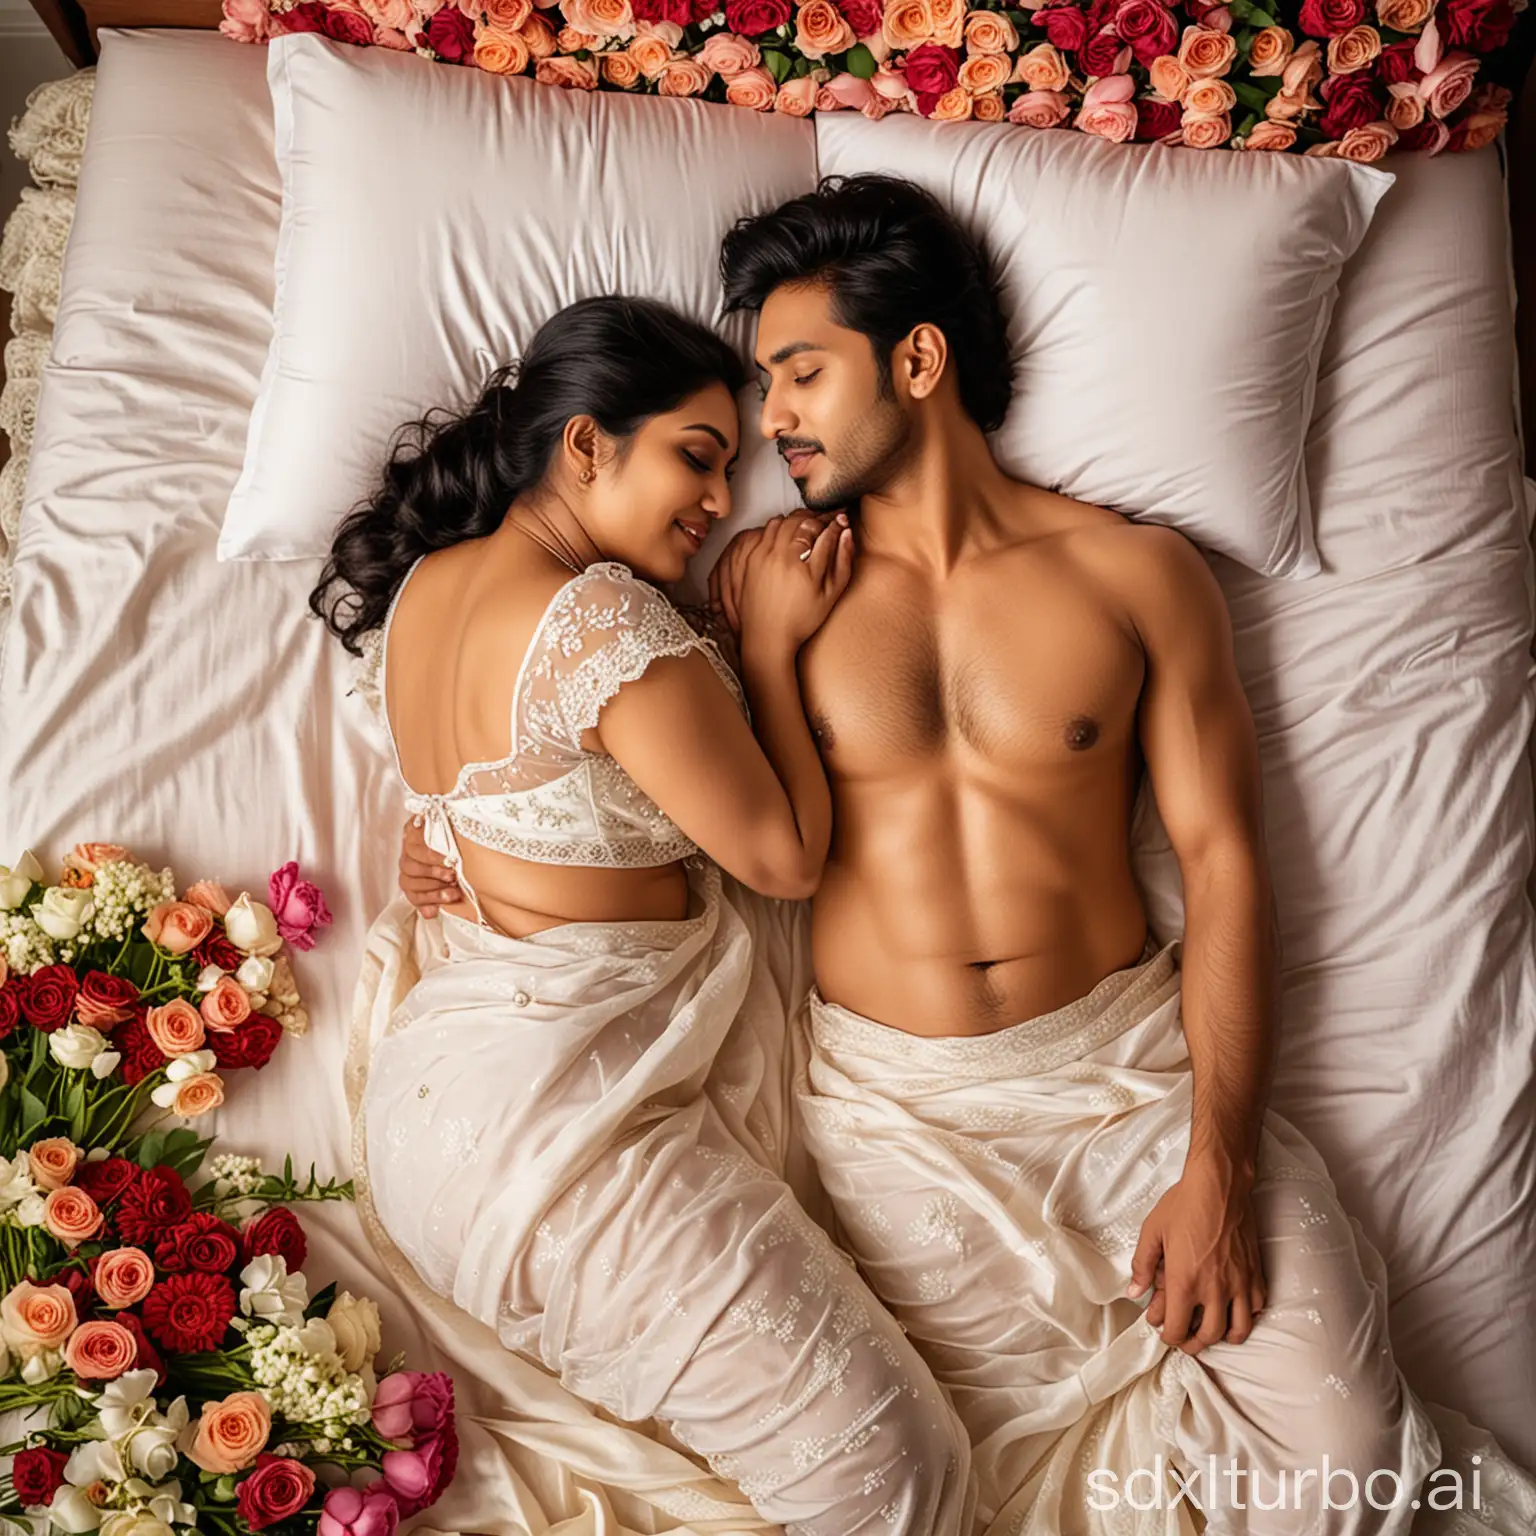 Young beautiful romantic newly married Indian Telugu couple cuddling on the bed at night. thick voluptuous curvy busty really beautiful pale and beautiful skin girl wearing sheer chemise lying on the bed next to a handsome hunk. After sex look, Top view, flowers on the bed. 